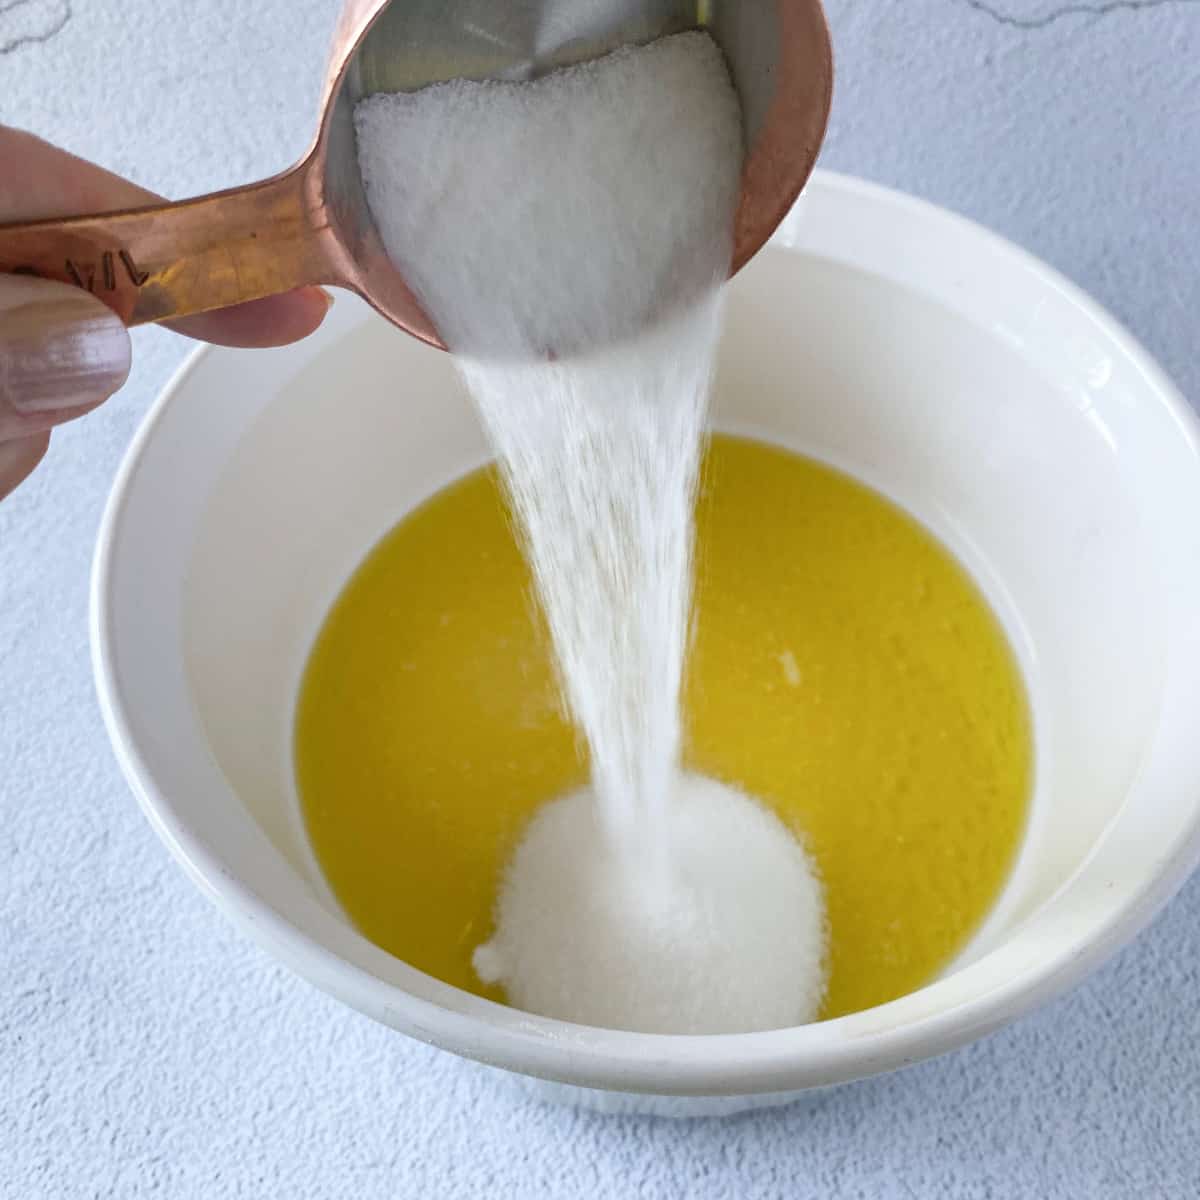 sugar being poured into a bowl of olive oil and melted butter in preparation for making olive oil buttermilk pancake batter.